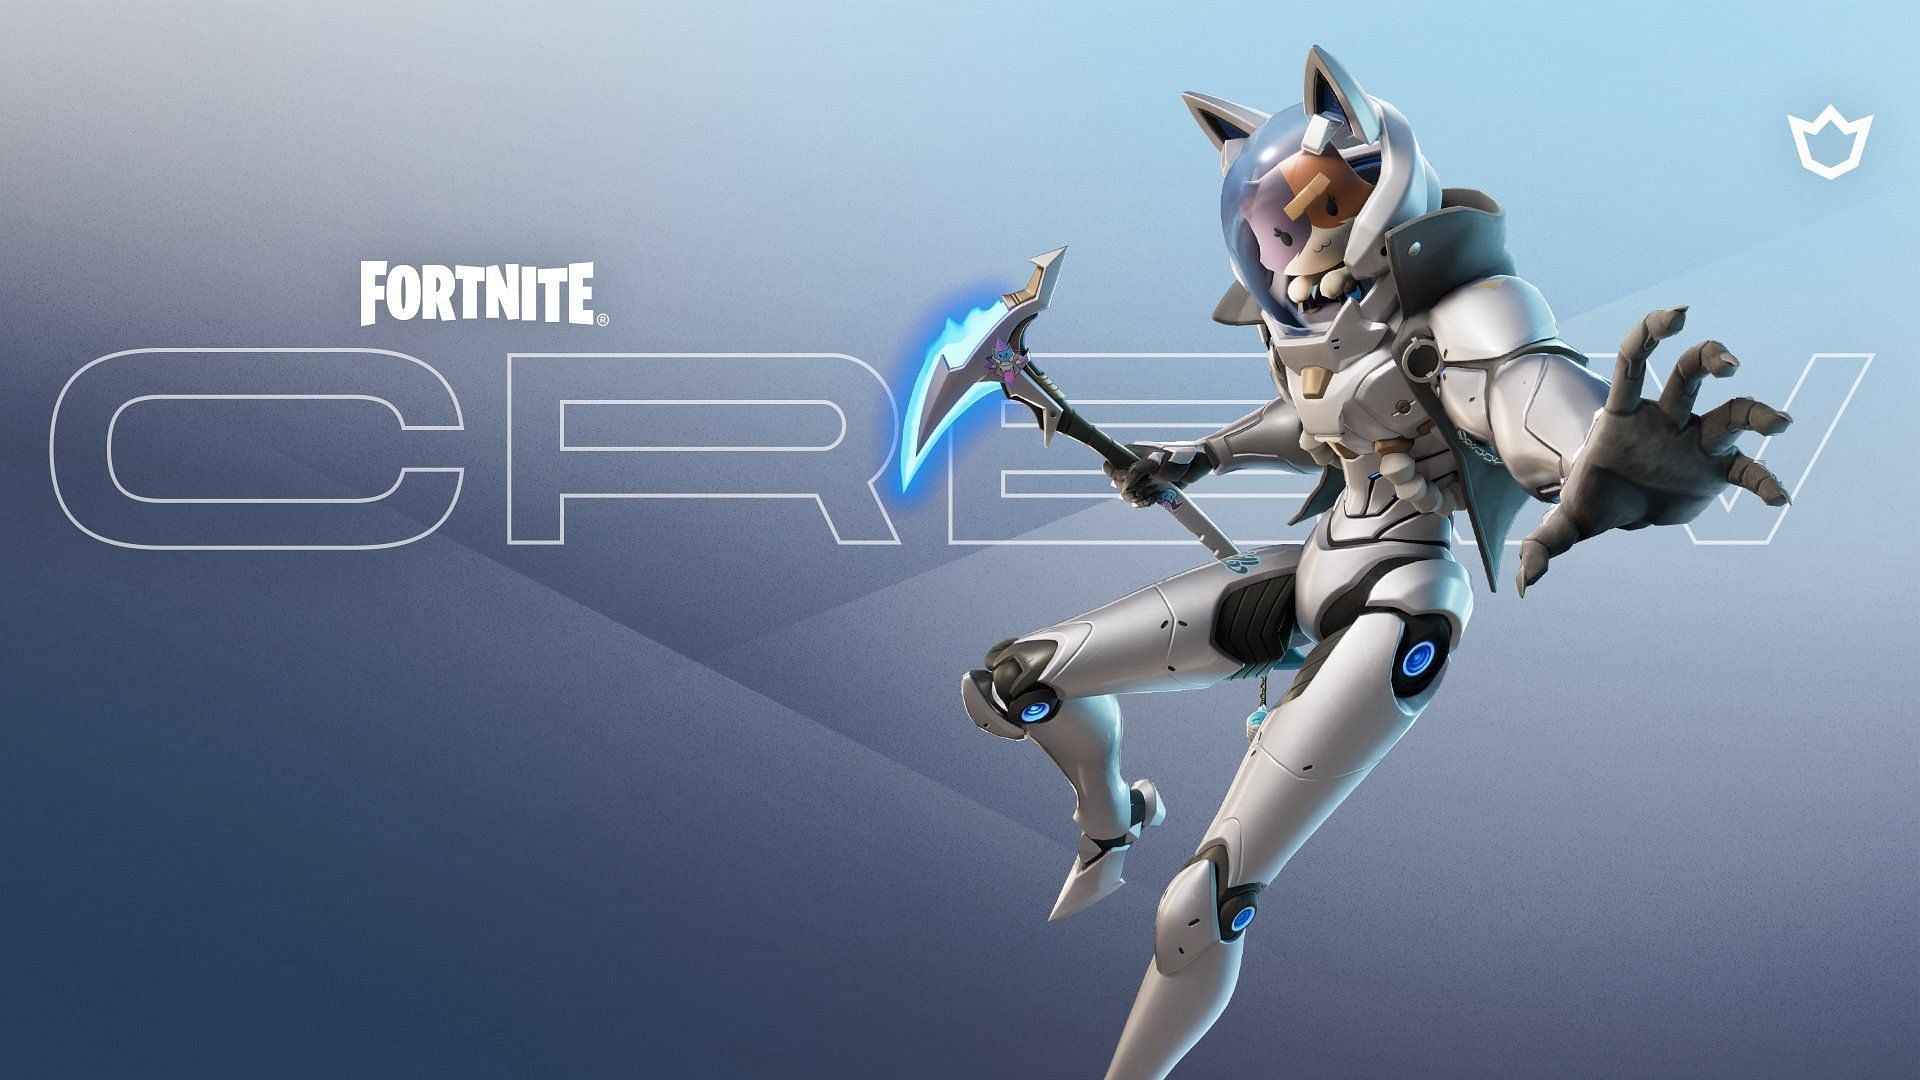 Fortnite Crew Pack for March is winning hearts online, here